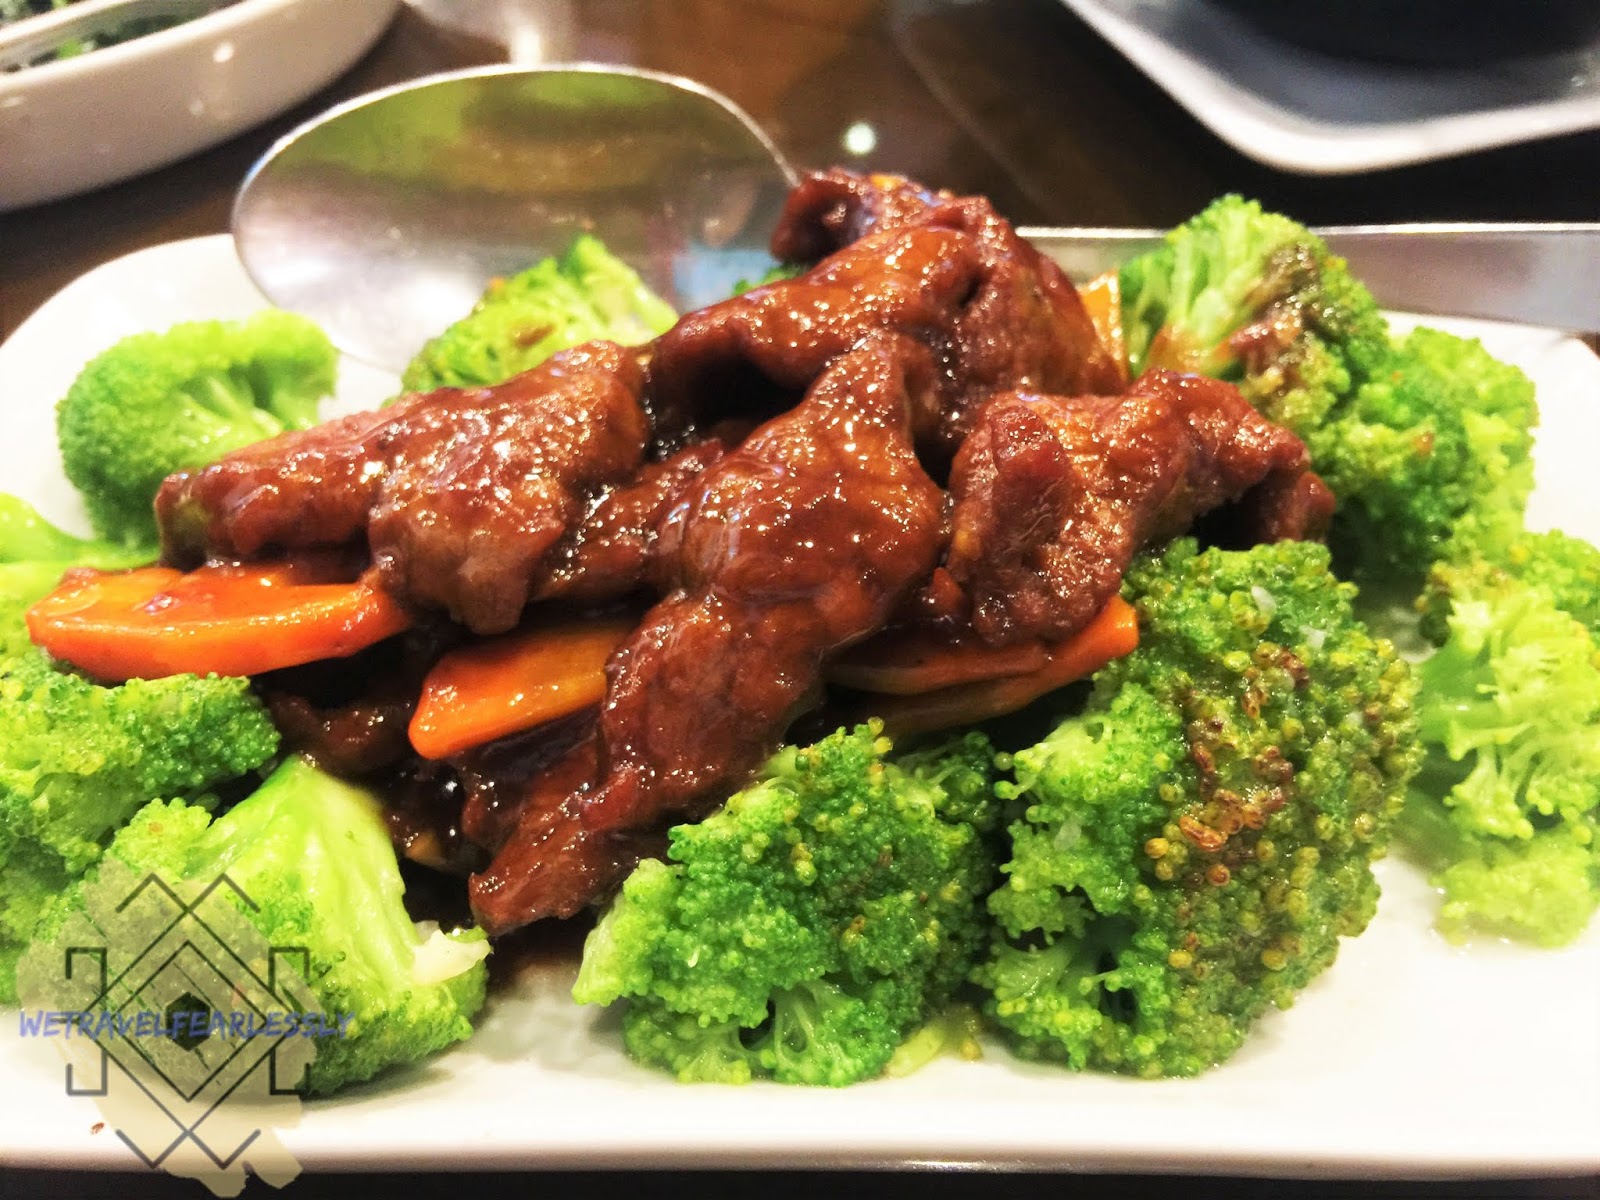 Stir-Fried Beef w/ Broccoli (PHP229) - Tien Ma's Taiwanese Cuisine in Libis, Quezon City - WTF Review